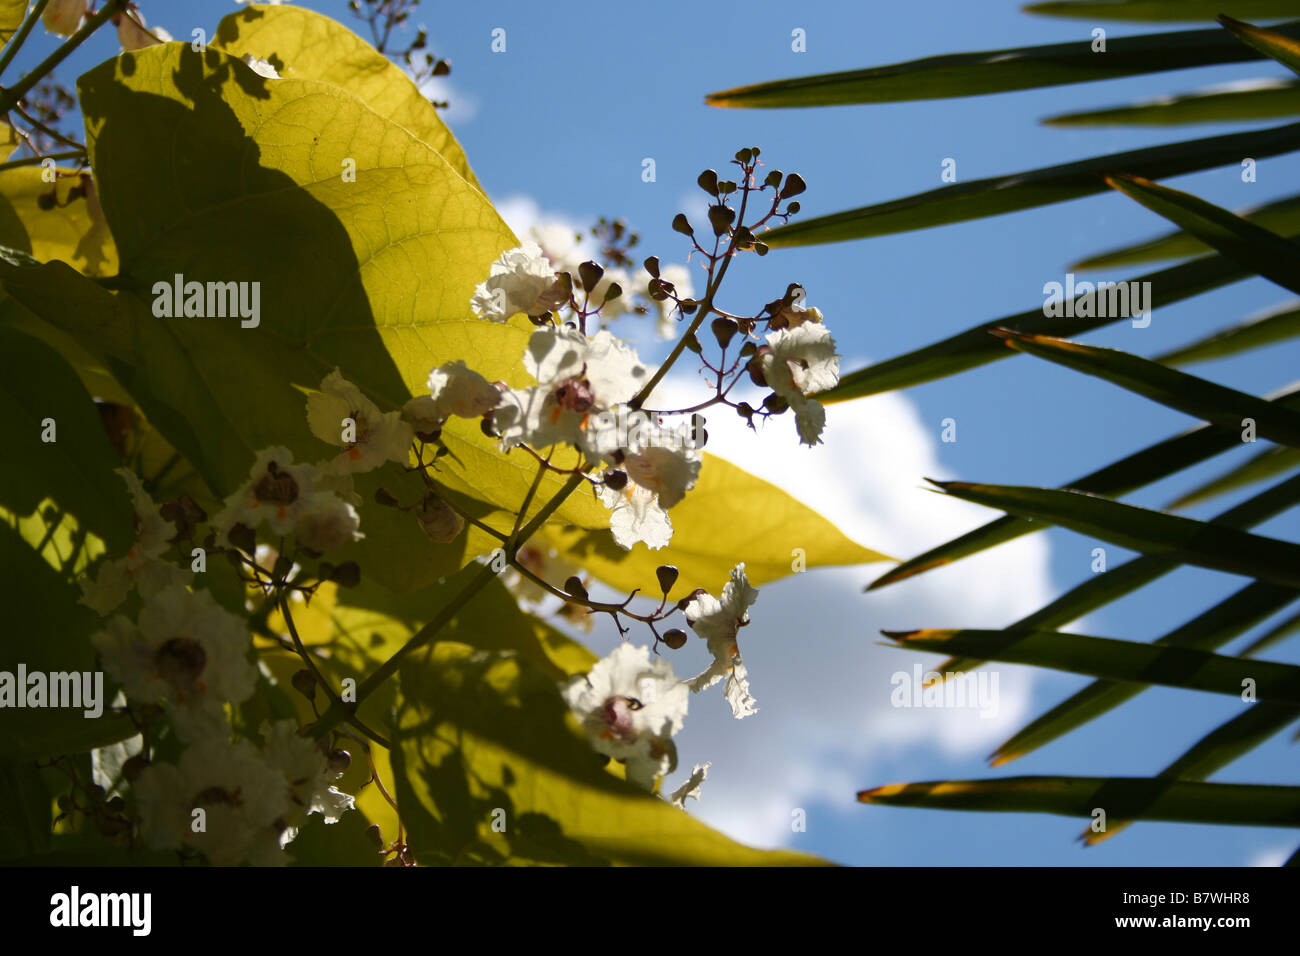 Flowering stem and leaves of an Indian Bean Tree (Catalpa bignonioides) with Chusan Palm tree leaves against blue sky Stock Photo